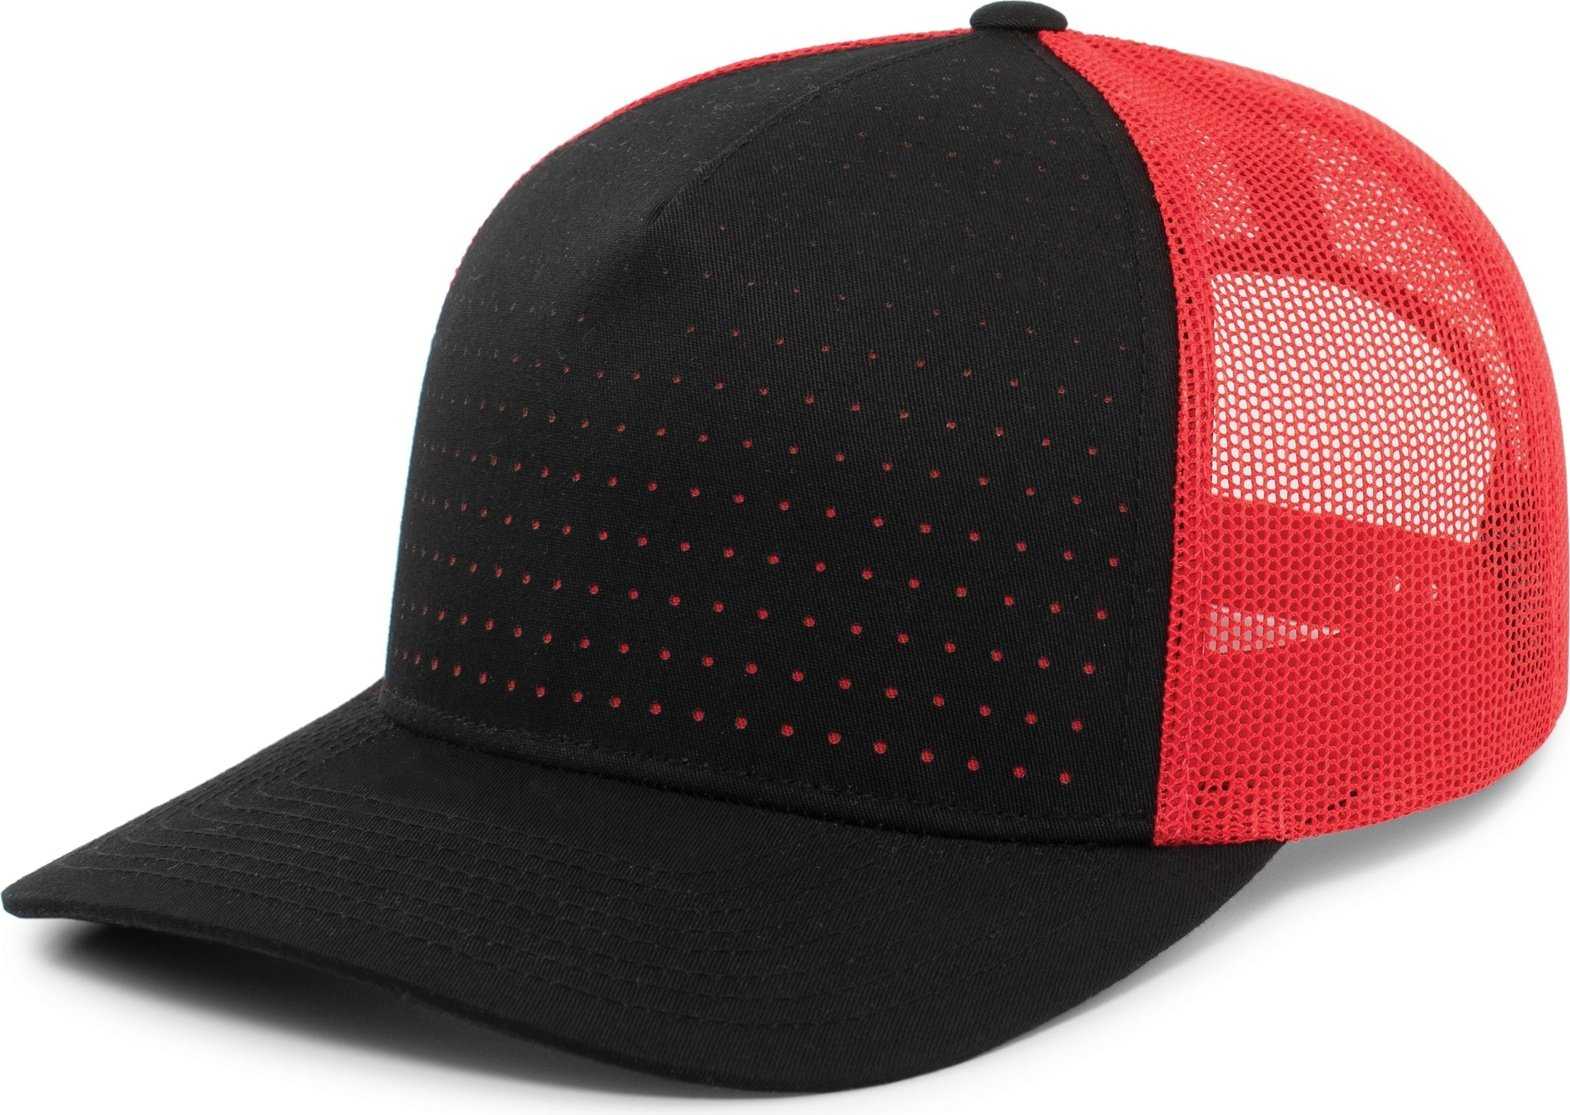 Pacific Headwear 105P Perforated 5 Panel Trucker Snapback Cap - Black Red Black - HIT a Double